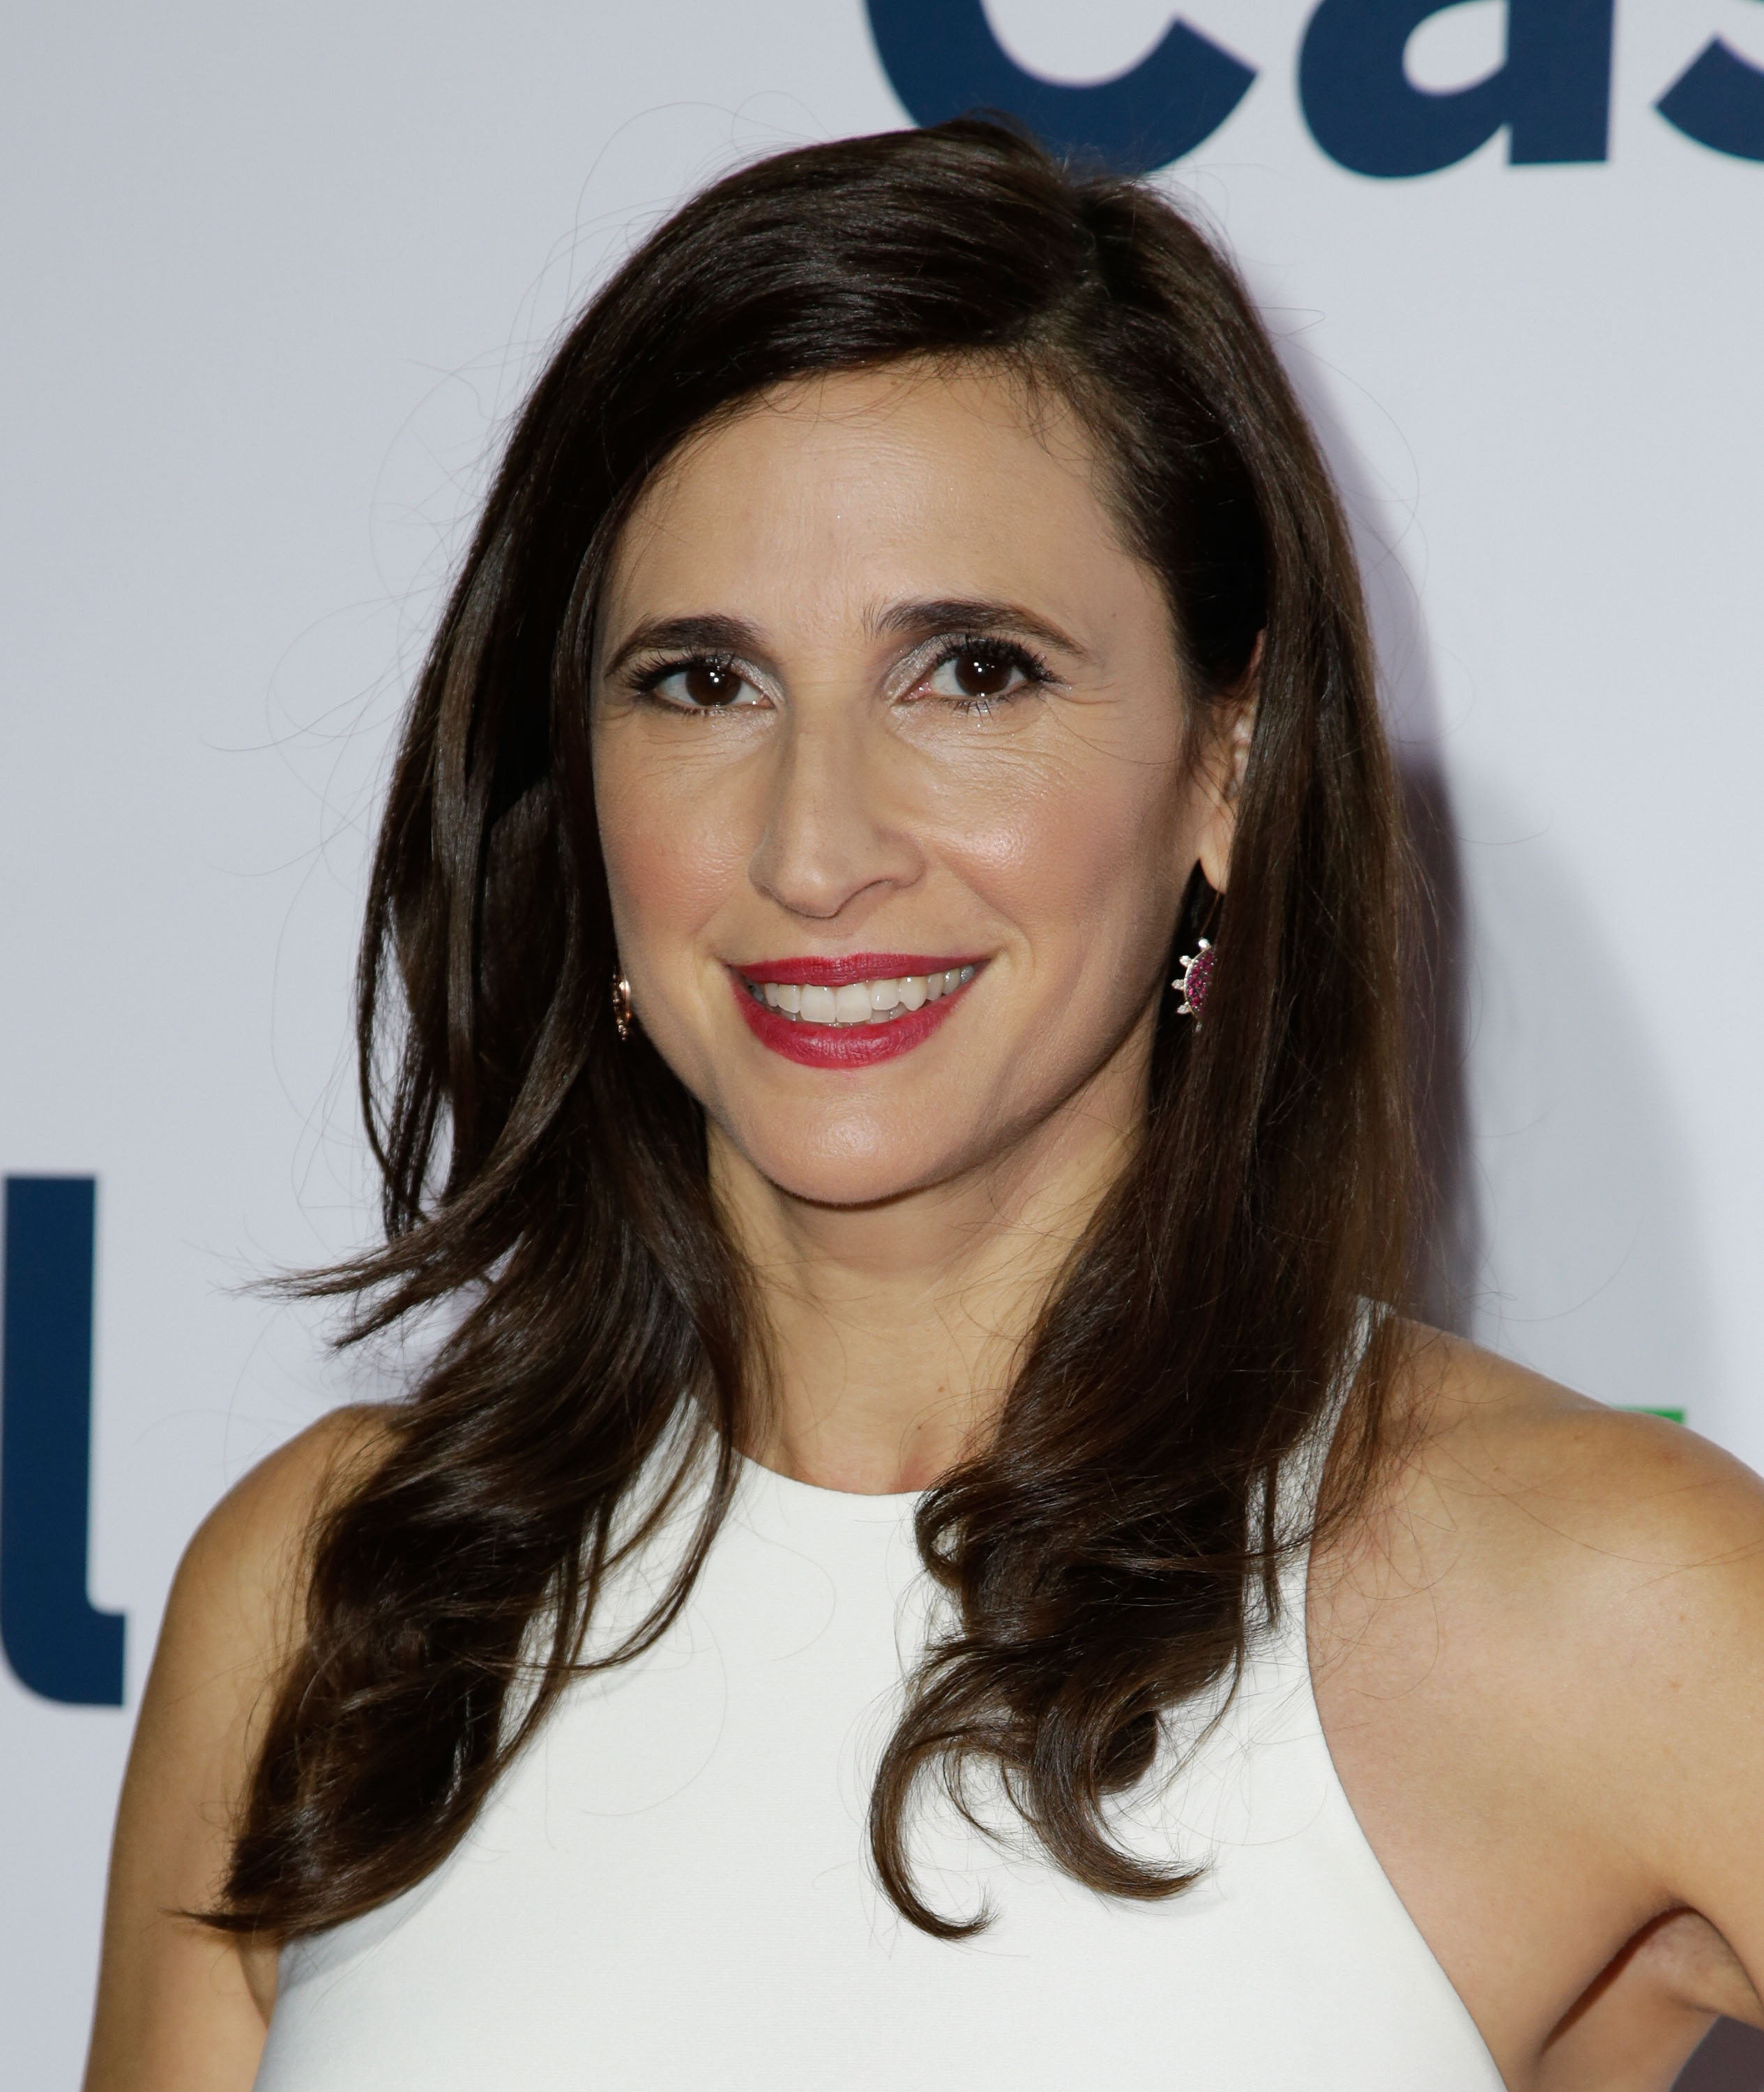 Michaela Watkins attends the premiere of Hulu's "Casual" on September 21, 2015 in West Hollywood, California. (Vincent Sandoval--Getty Images)